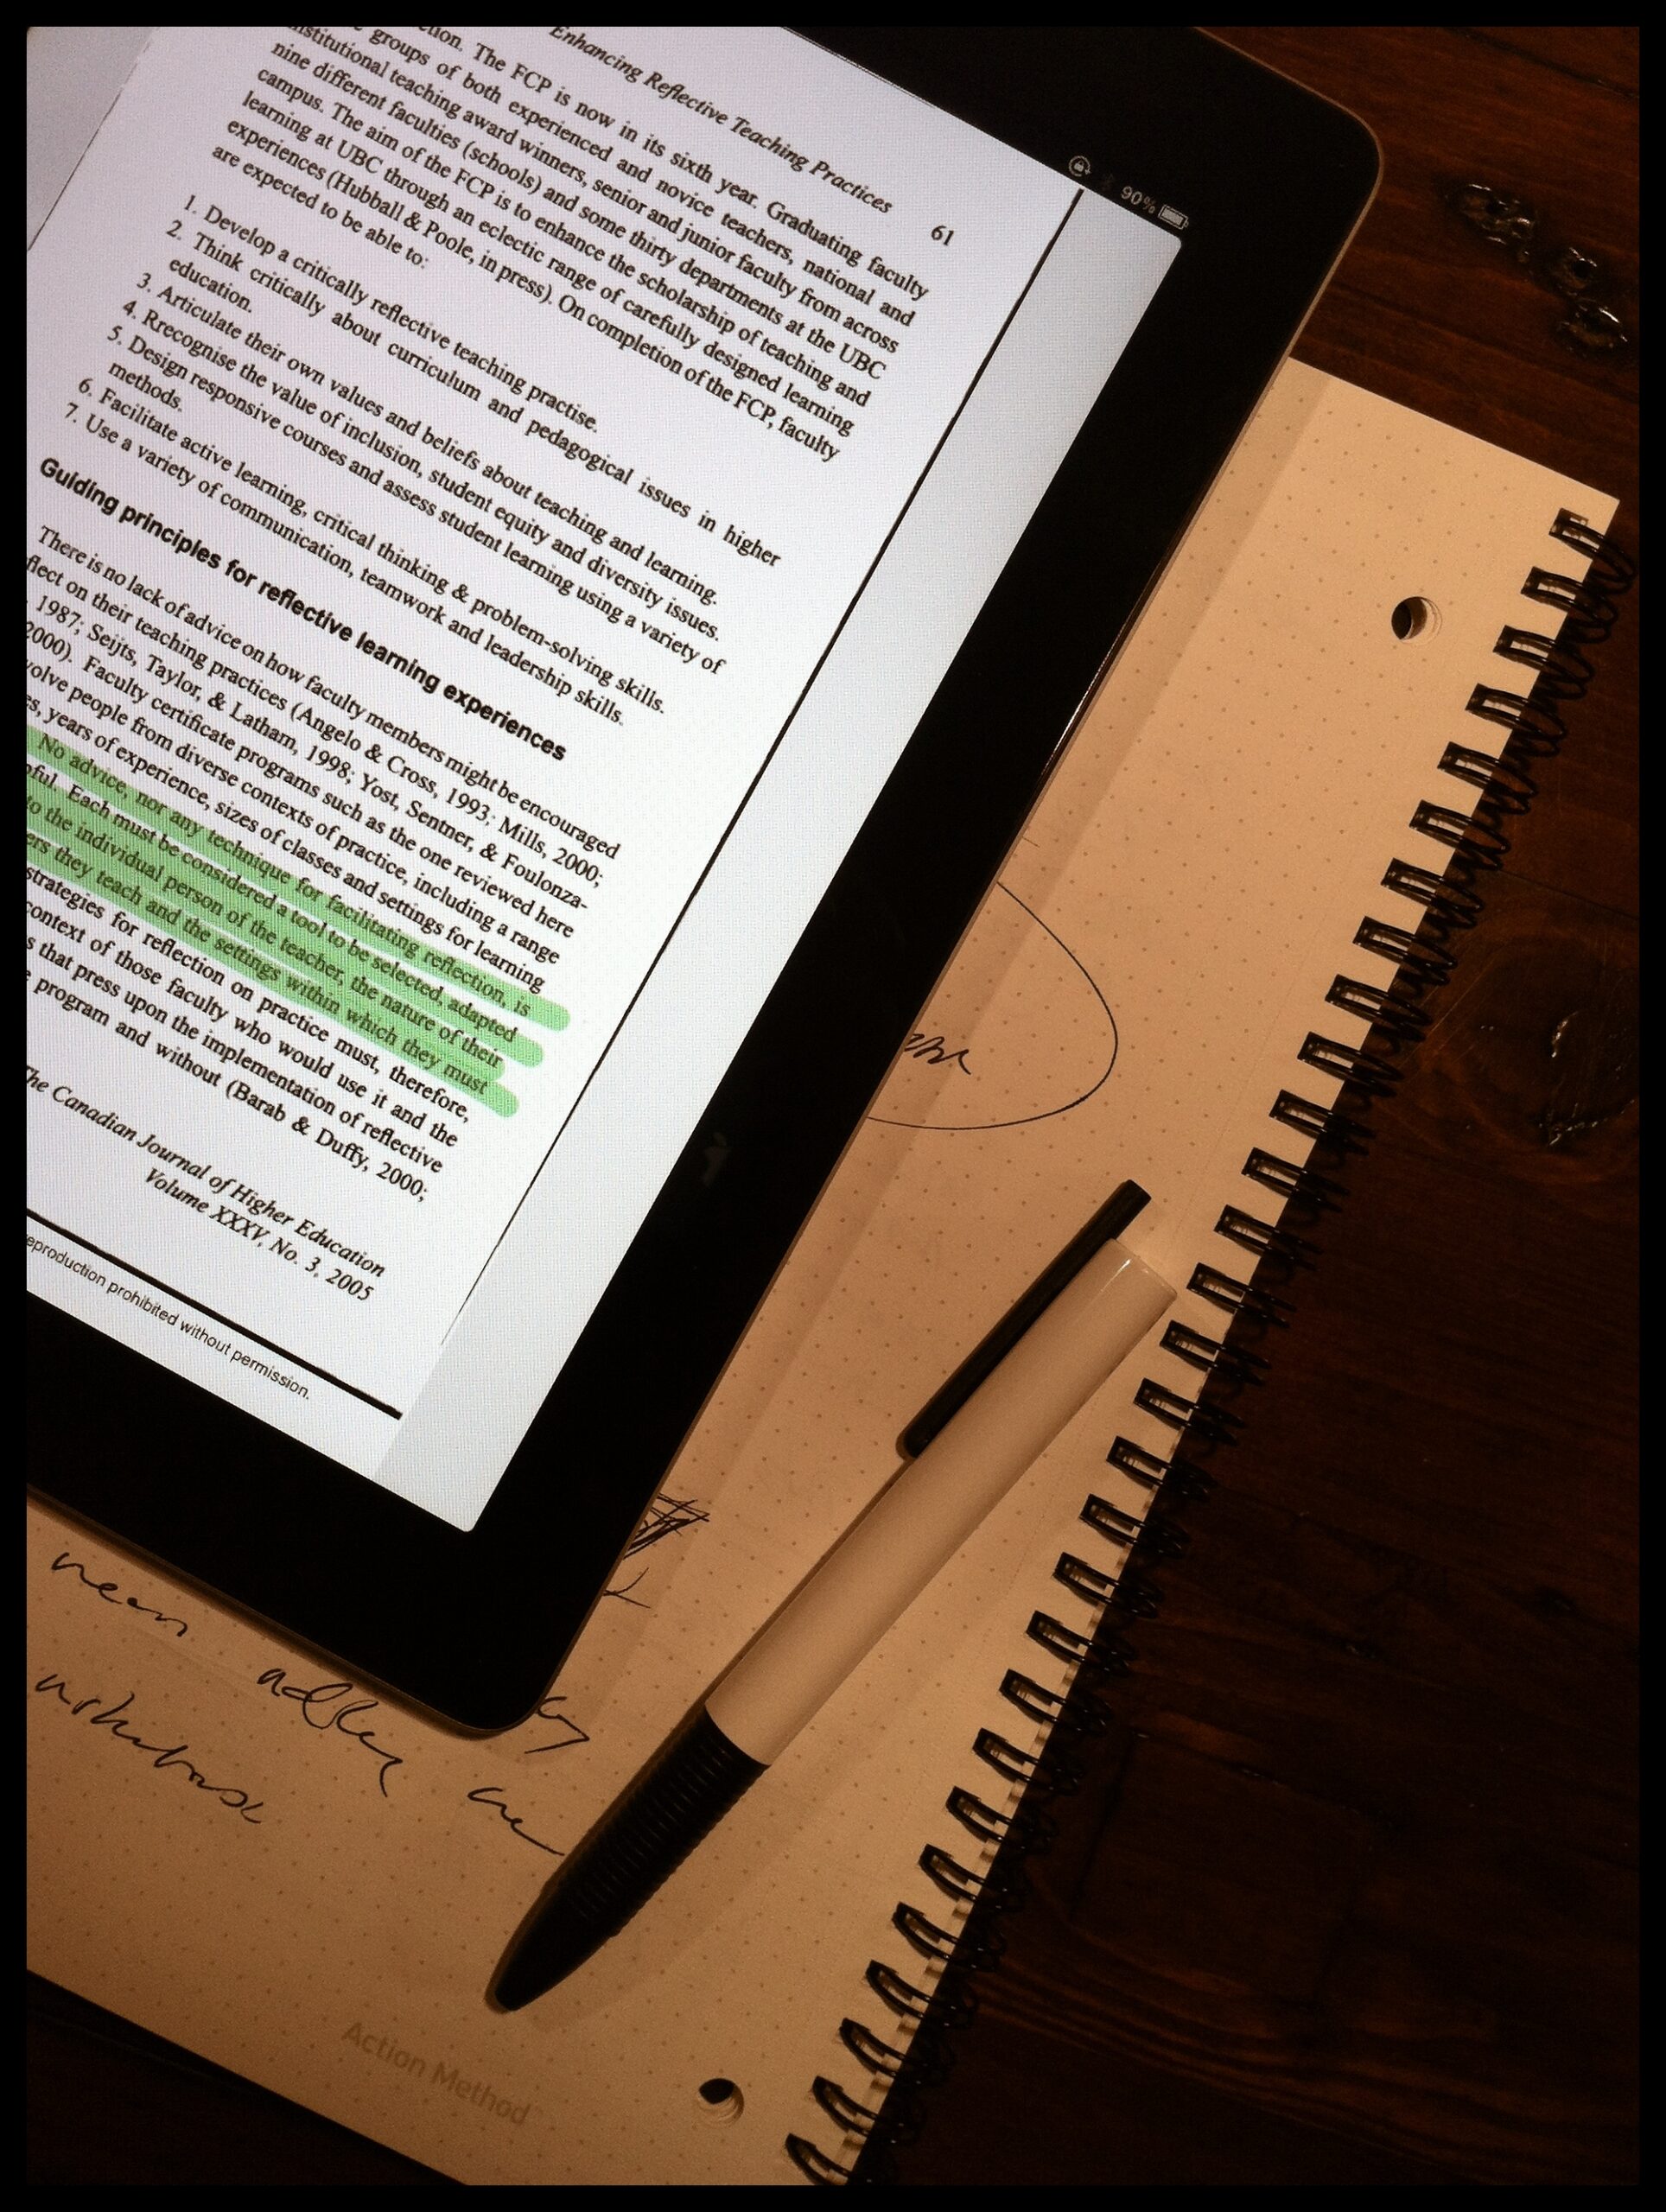 Electronic tablet, notebook, and pen on a desktop. Text on the tablet screen has been highlighted, notebook has some notes.